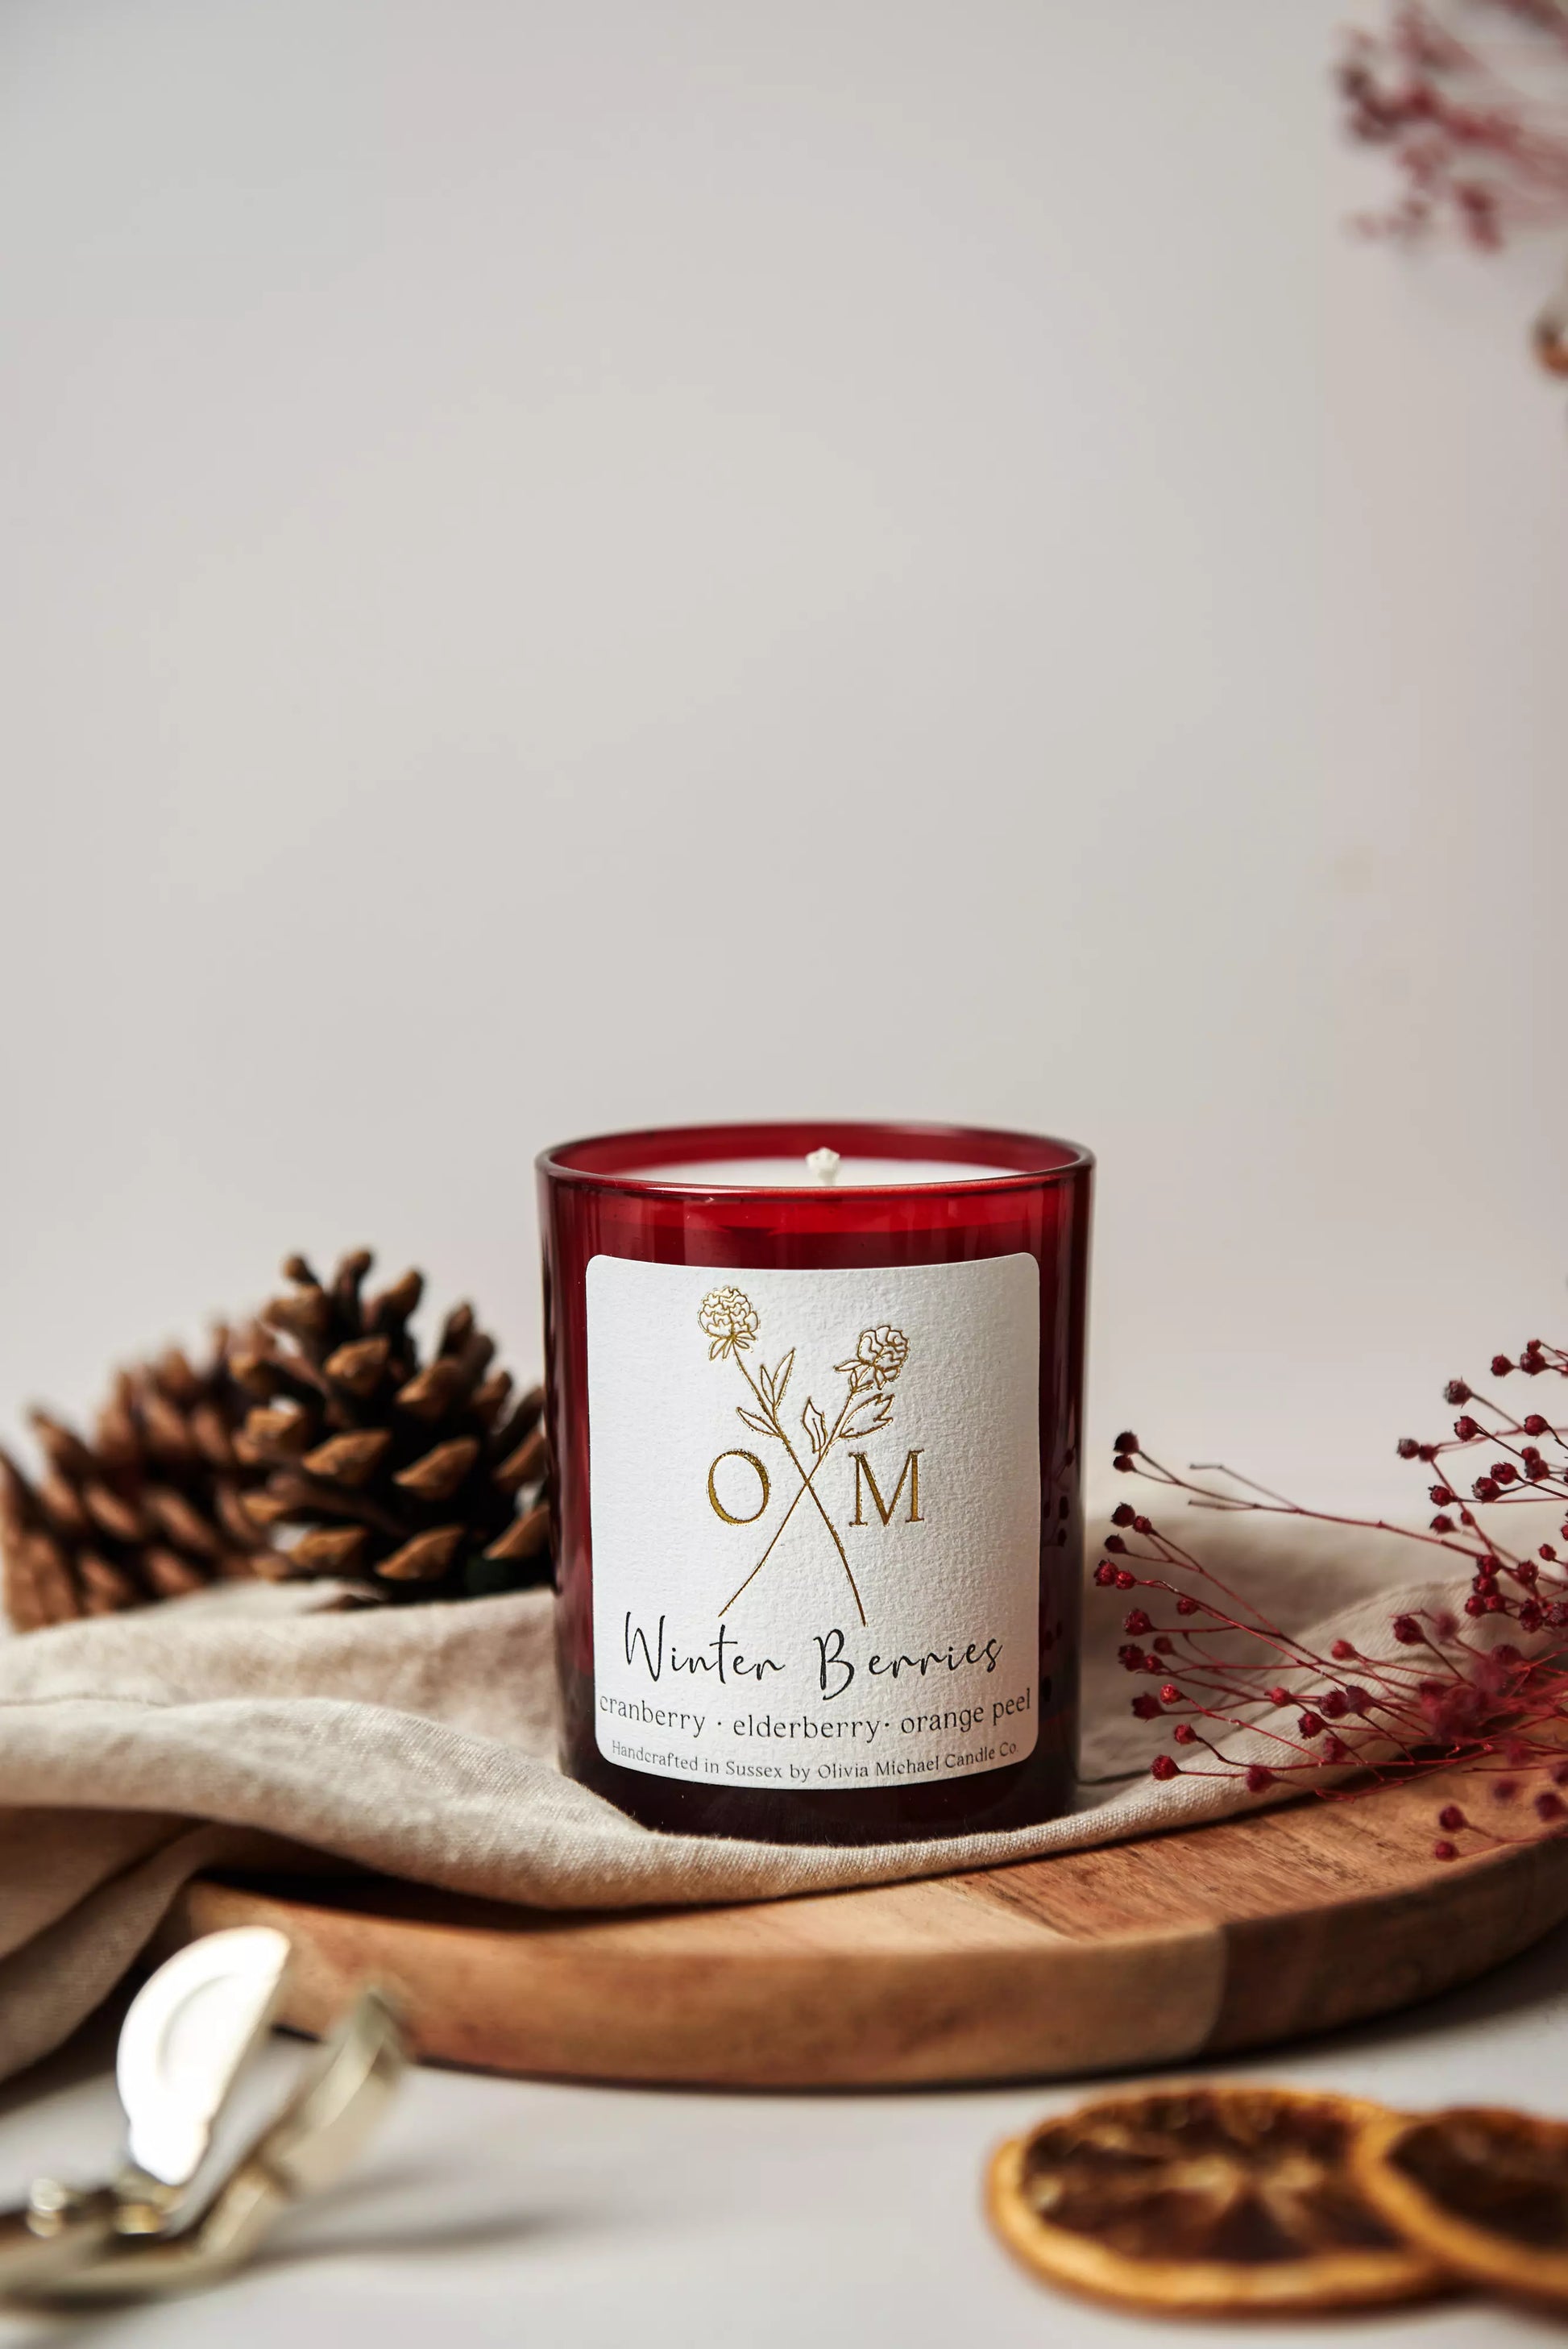 Our cranberry and elderberry scented candle is on display in an amber glass jar.